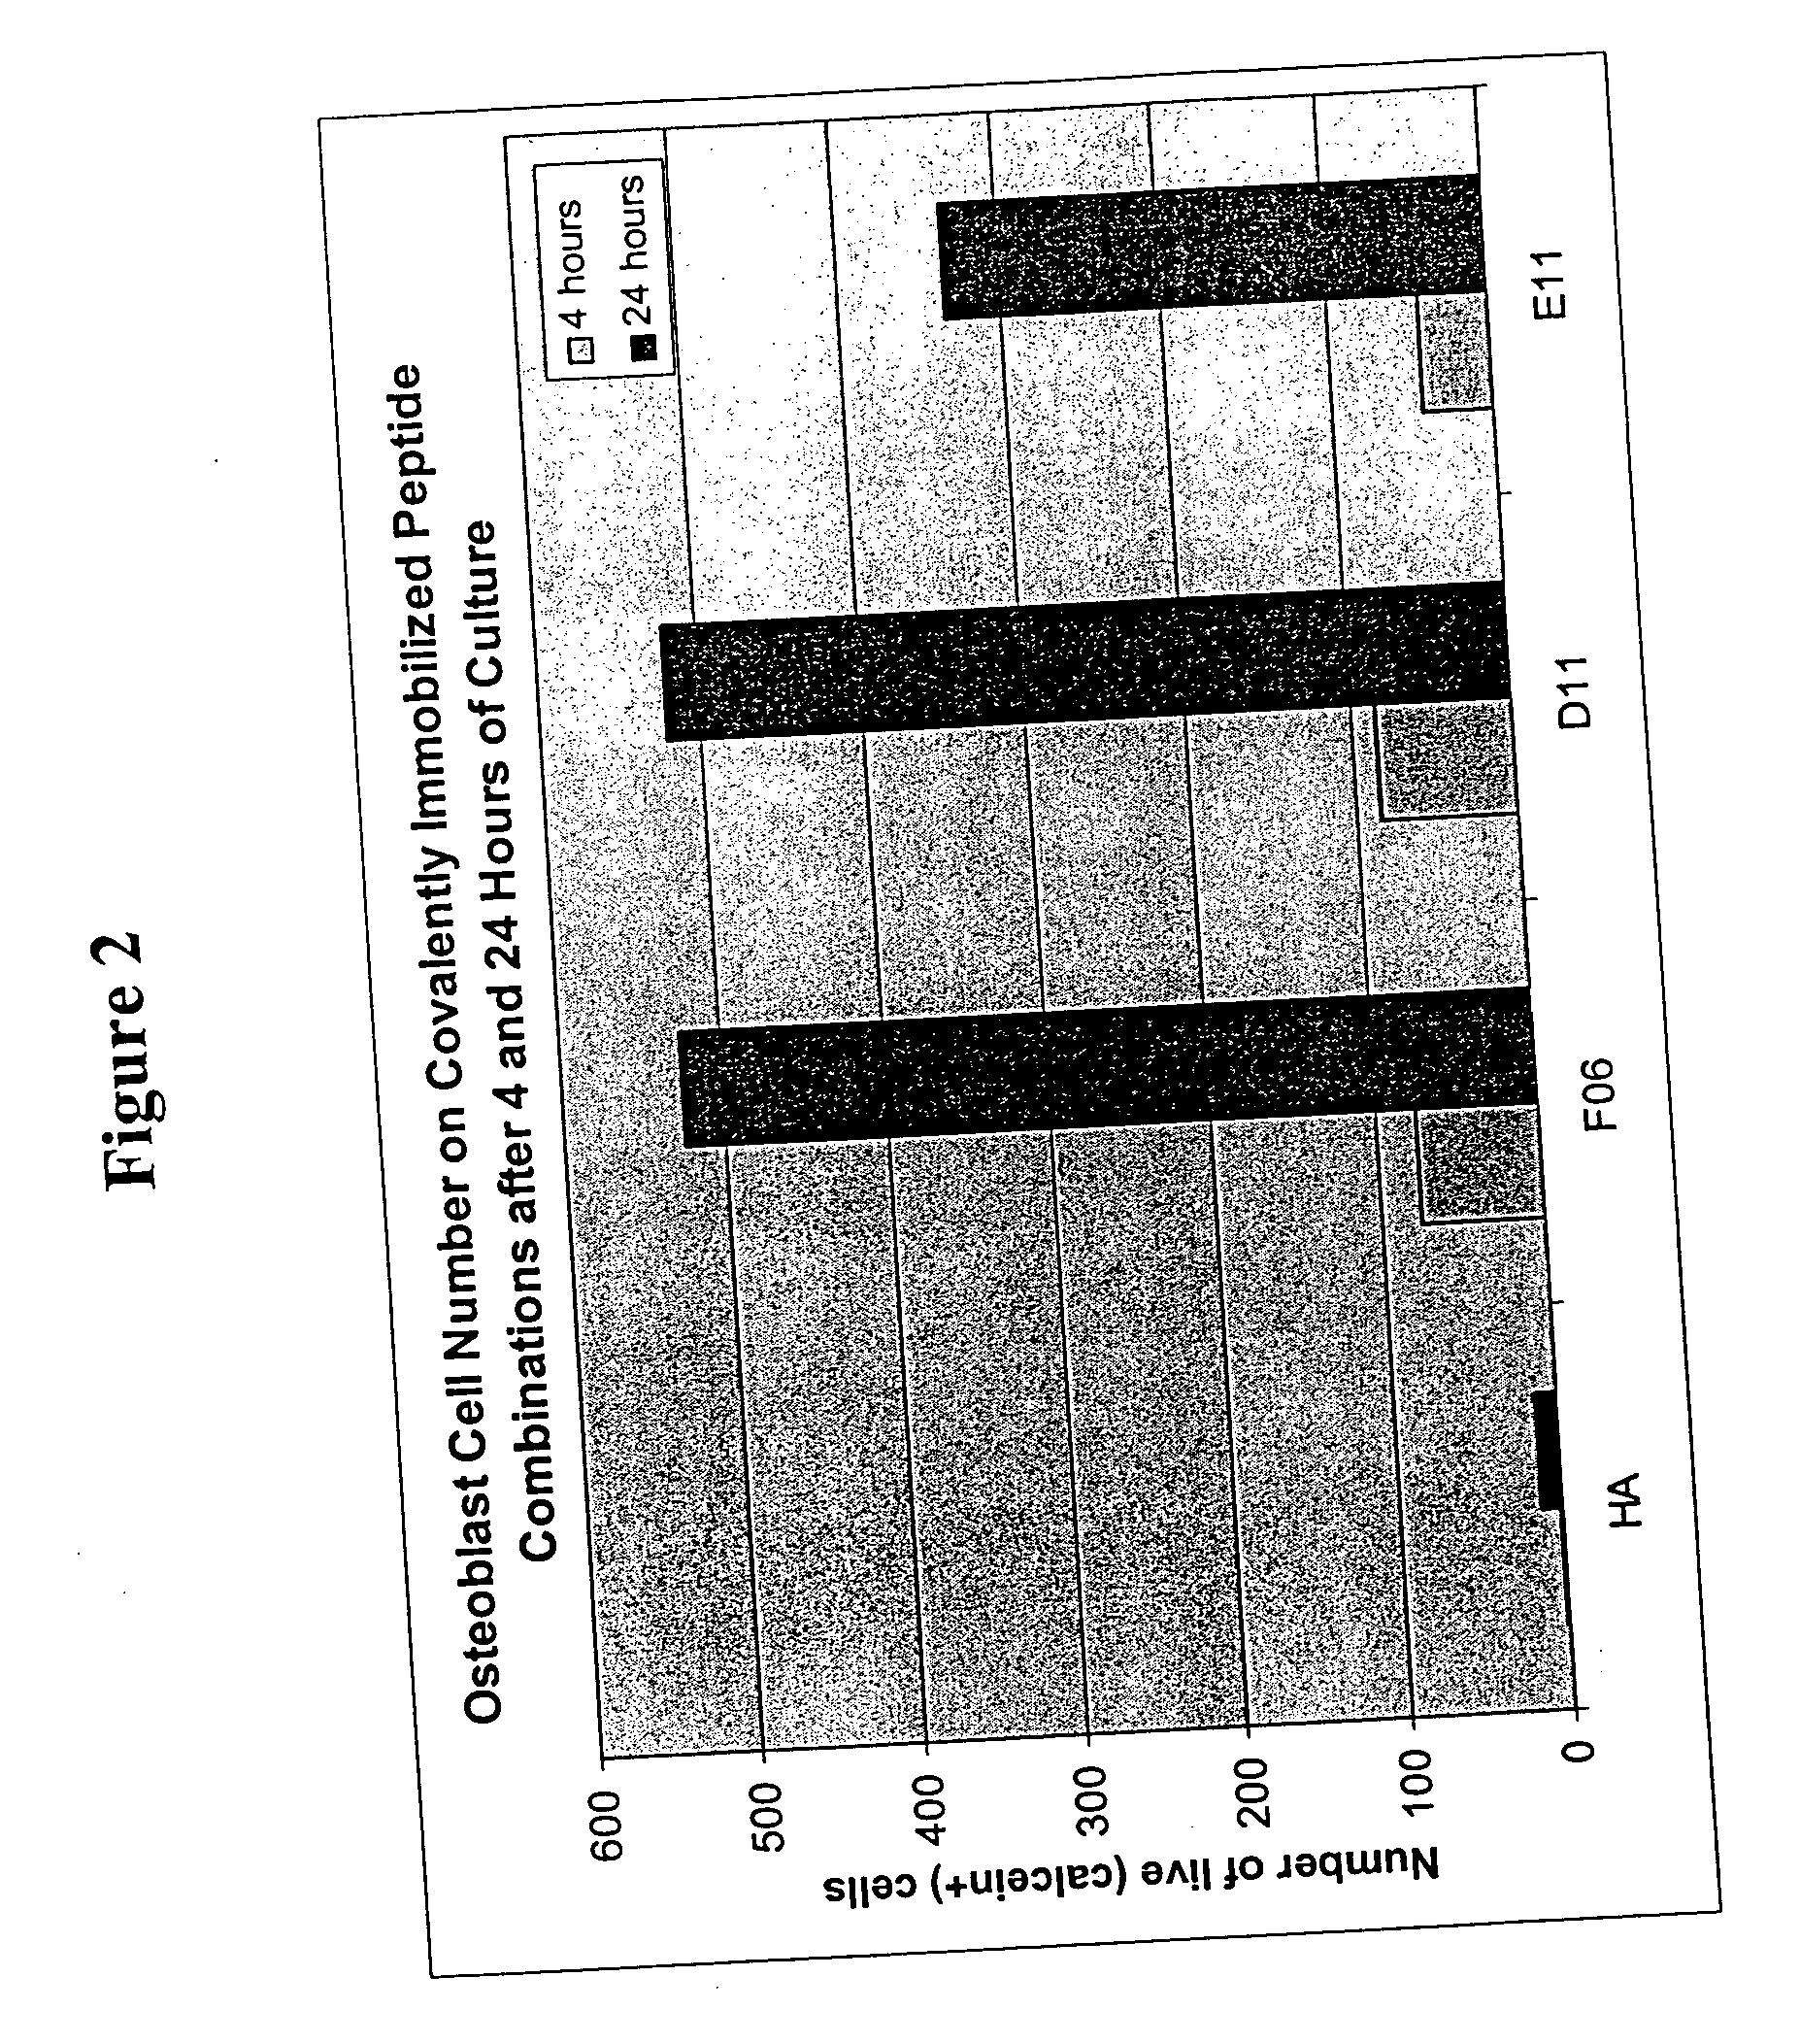 Peptides for enhanced cell attachment and growth